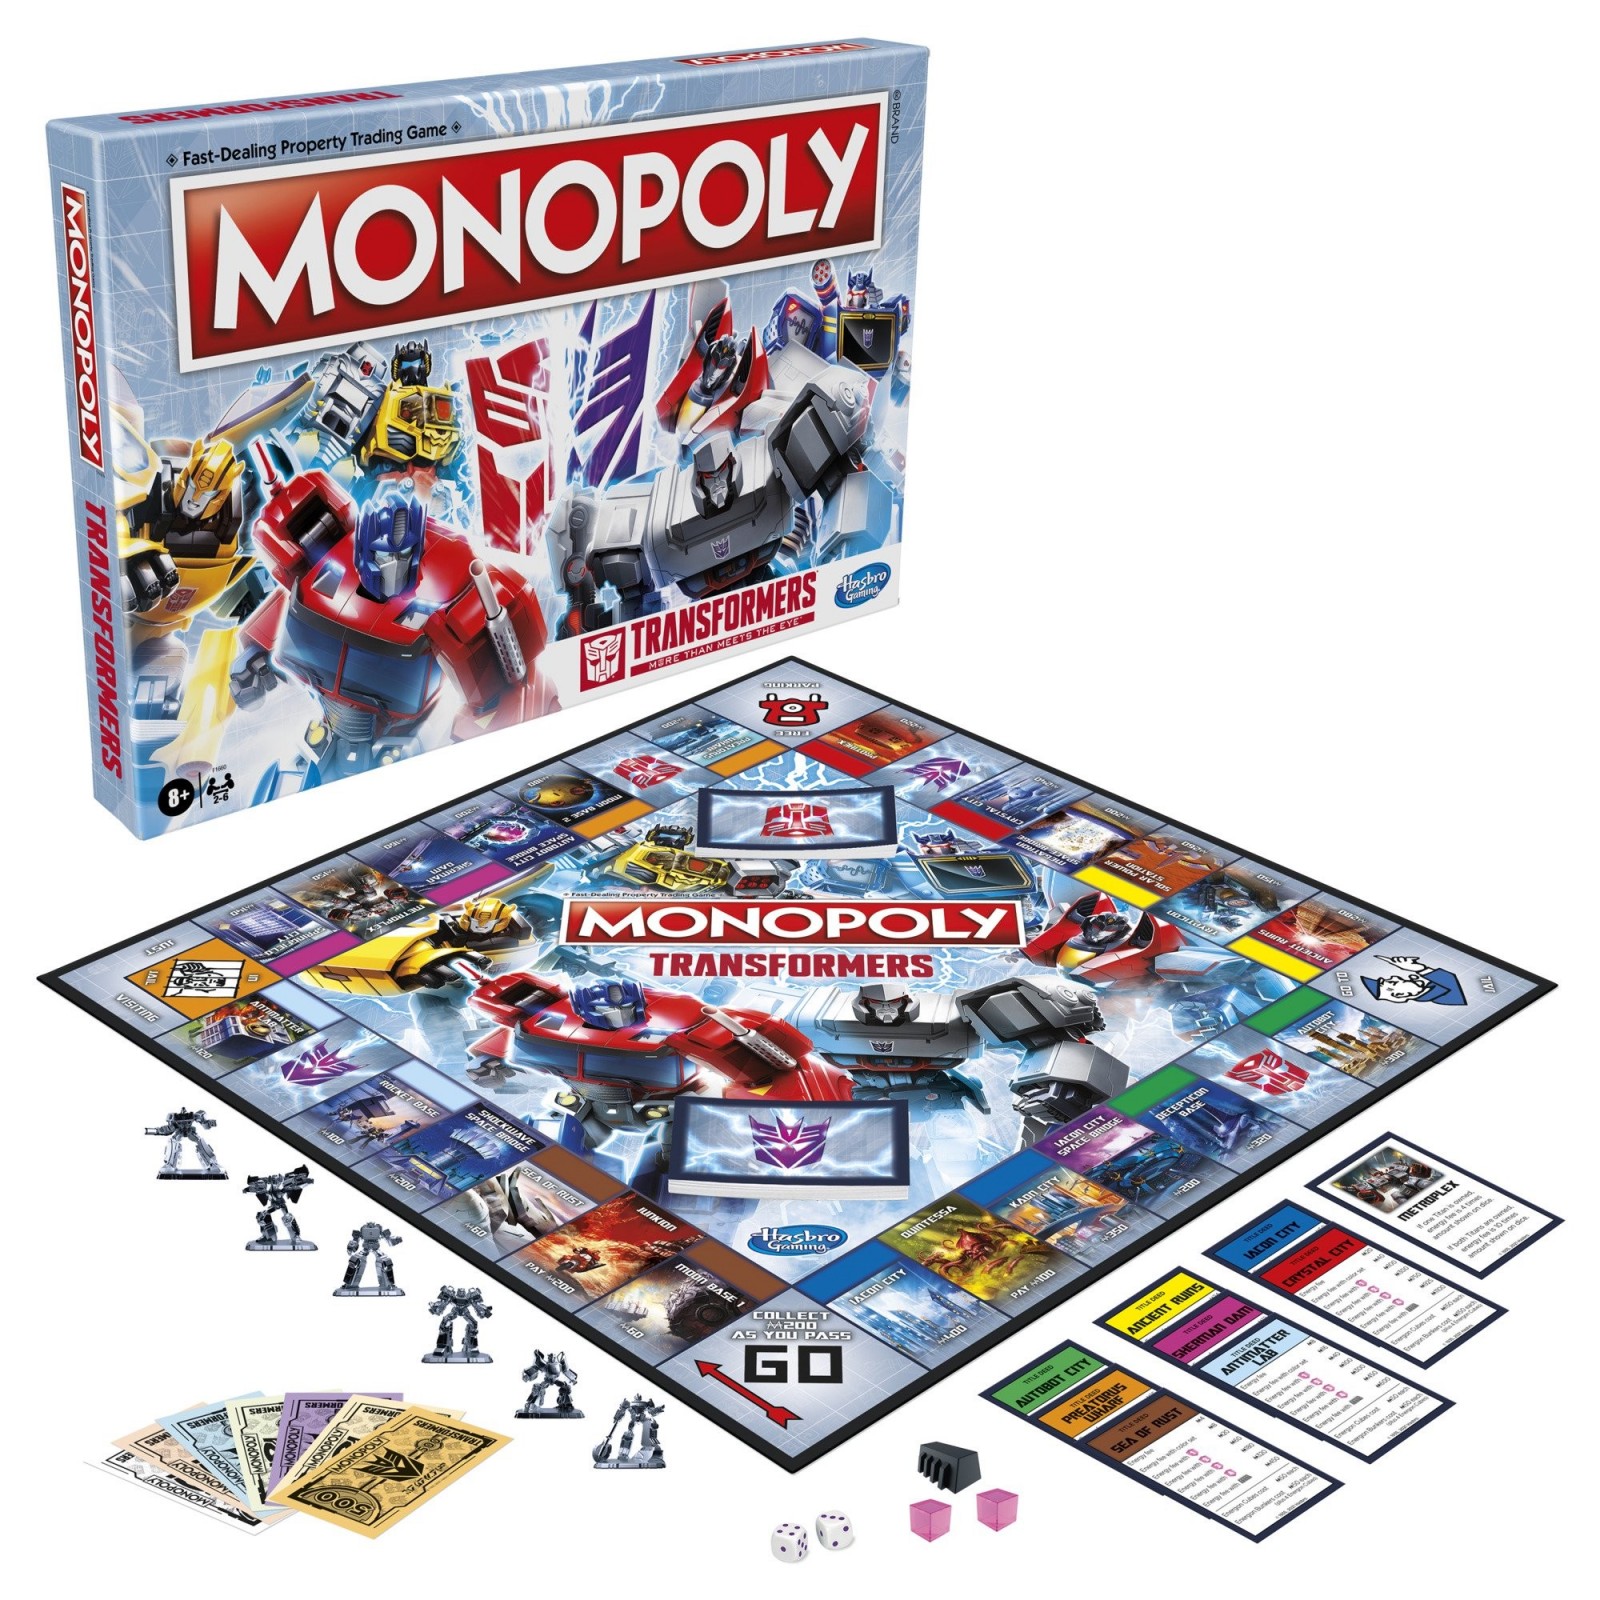 Transformers News: Stock Images of New Transformers  Monopoly Game on Walmart Listing